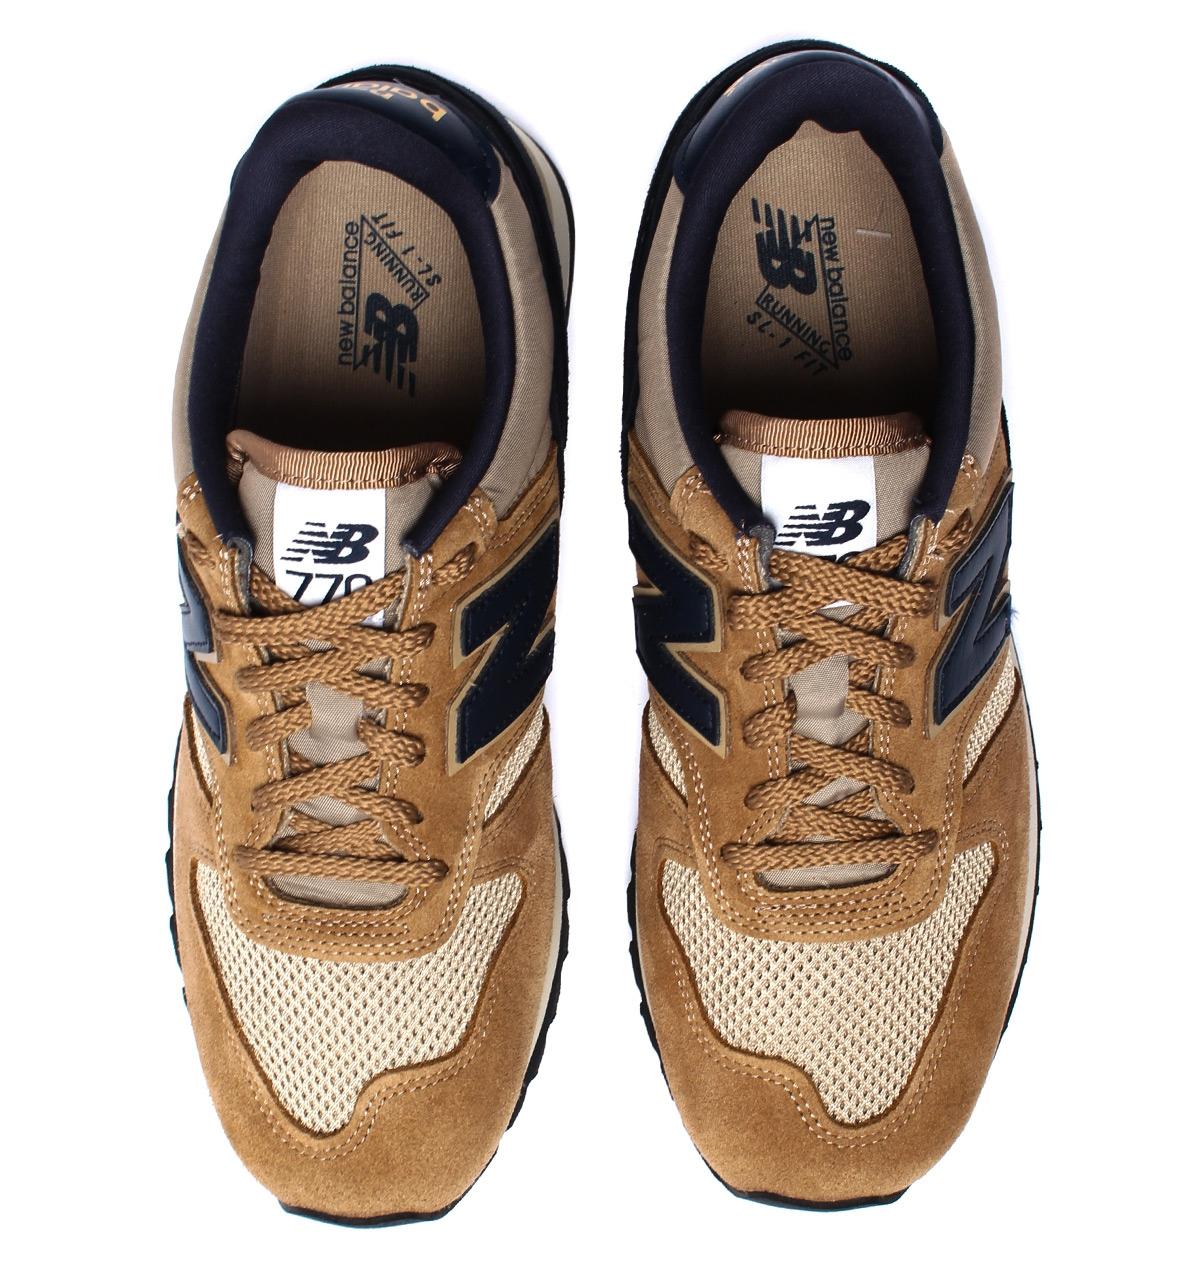 New Balance Suede 770 Made In England Tan Trainers for Men - Lyst